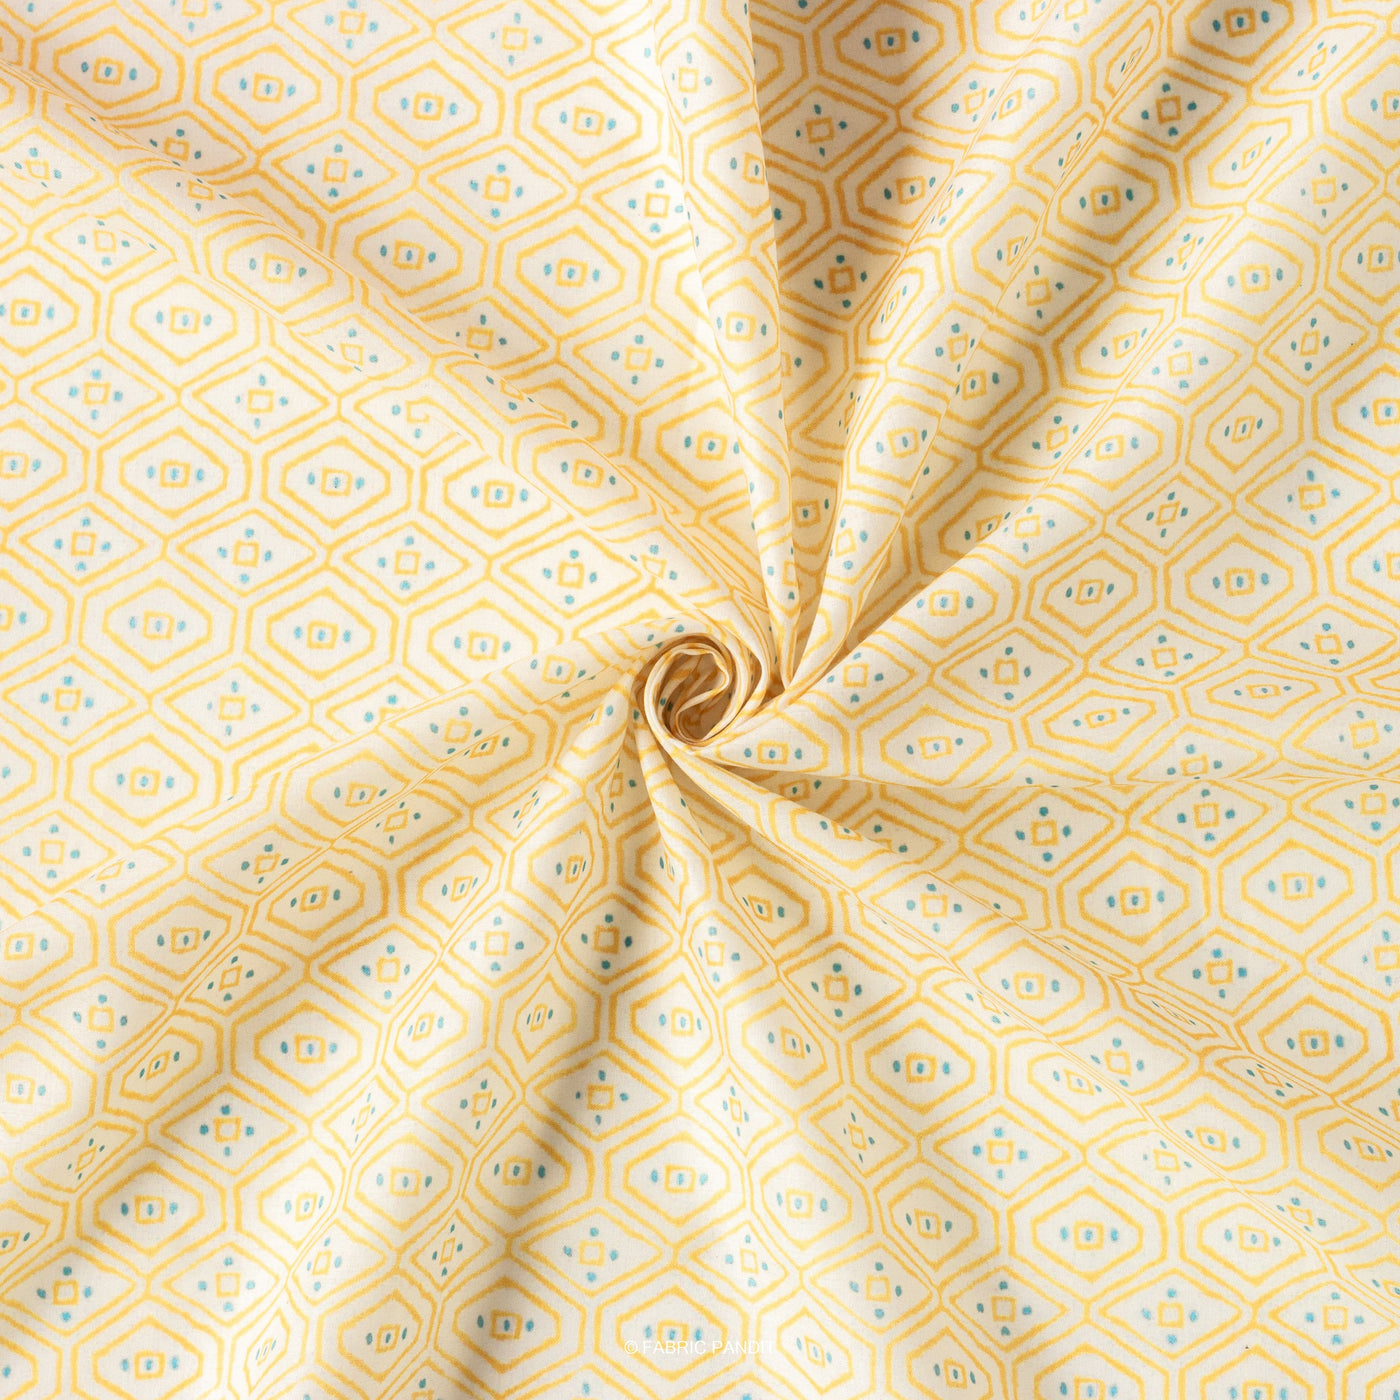 Fabric Pandit Cut Piece 0.25M (CUT PIECE) Lemon Yellow Abstract Honey Comb Pattern Digital Printed Cambric Fabric (Width 43 Inches)